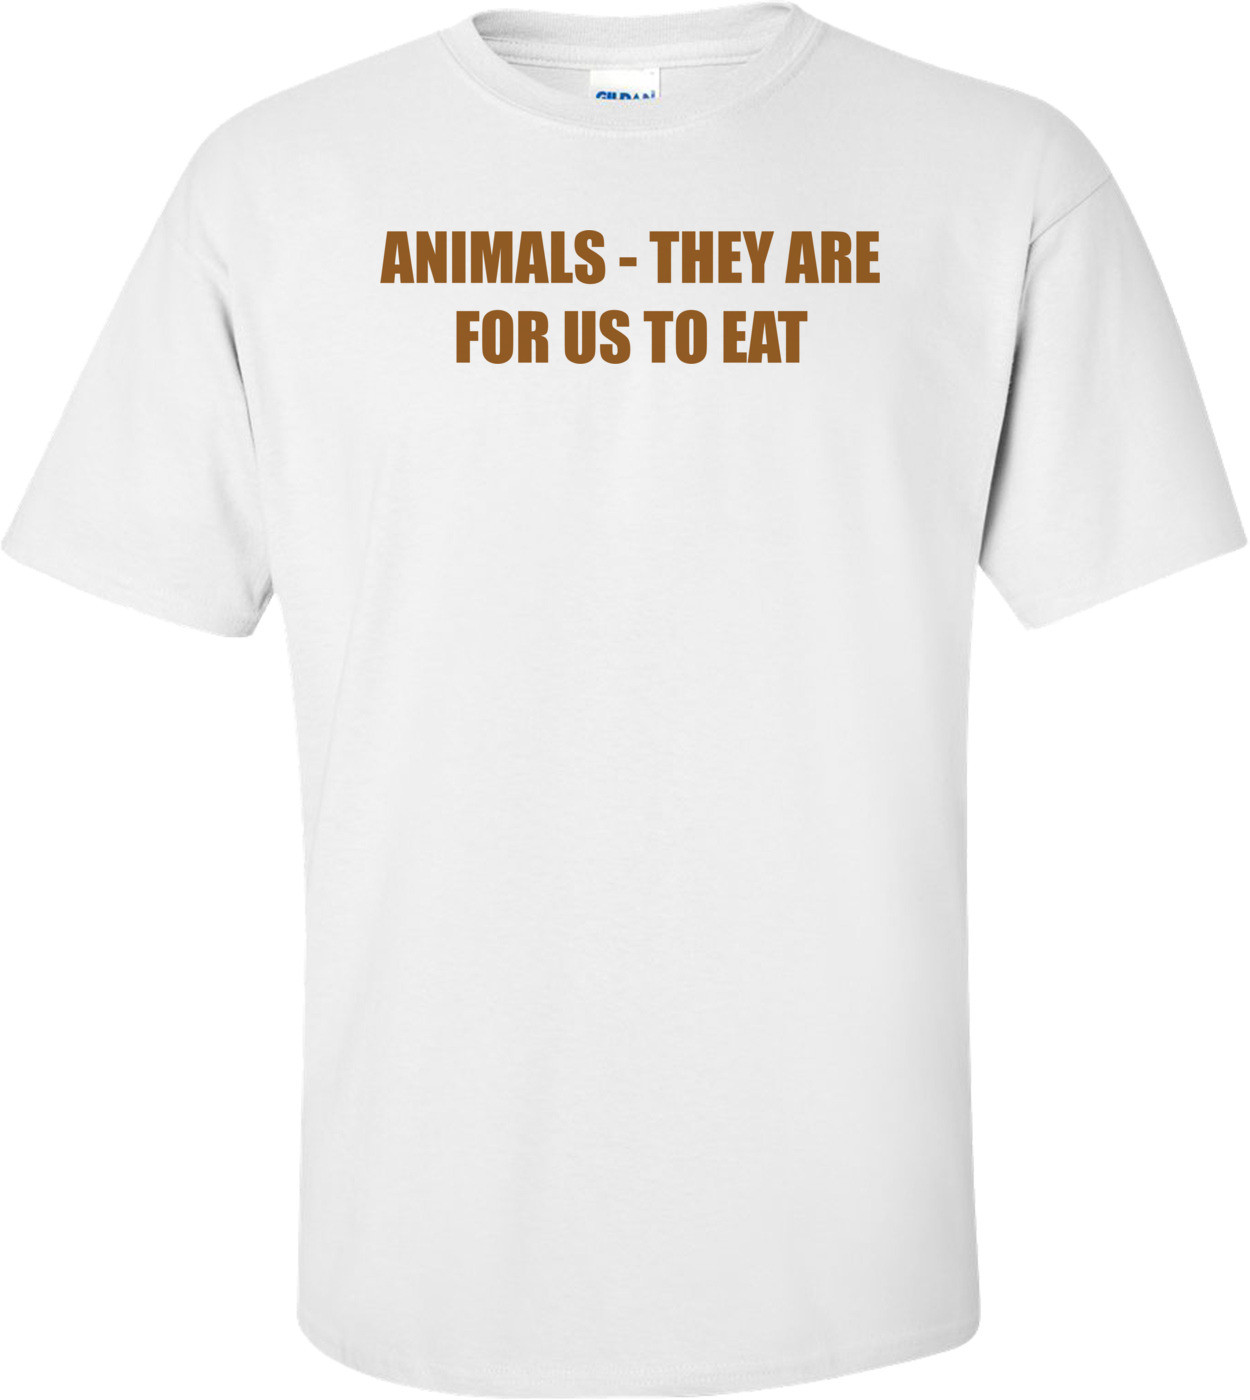 ANIMALS - THEY ARE FOR US TO EAT Shirt